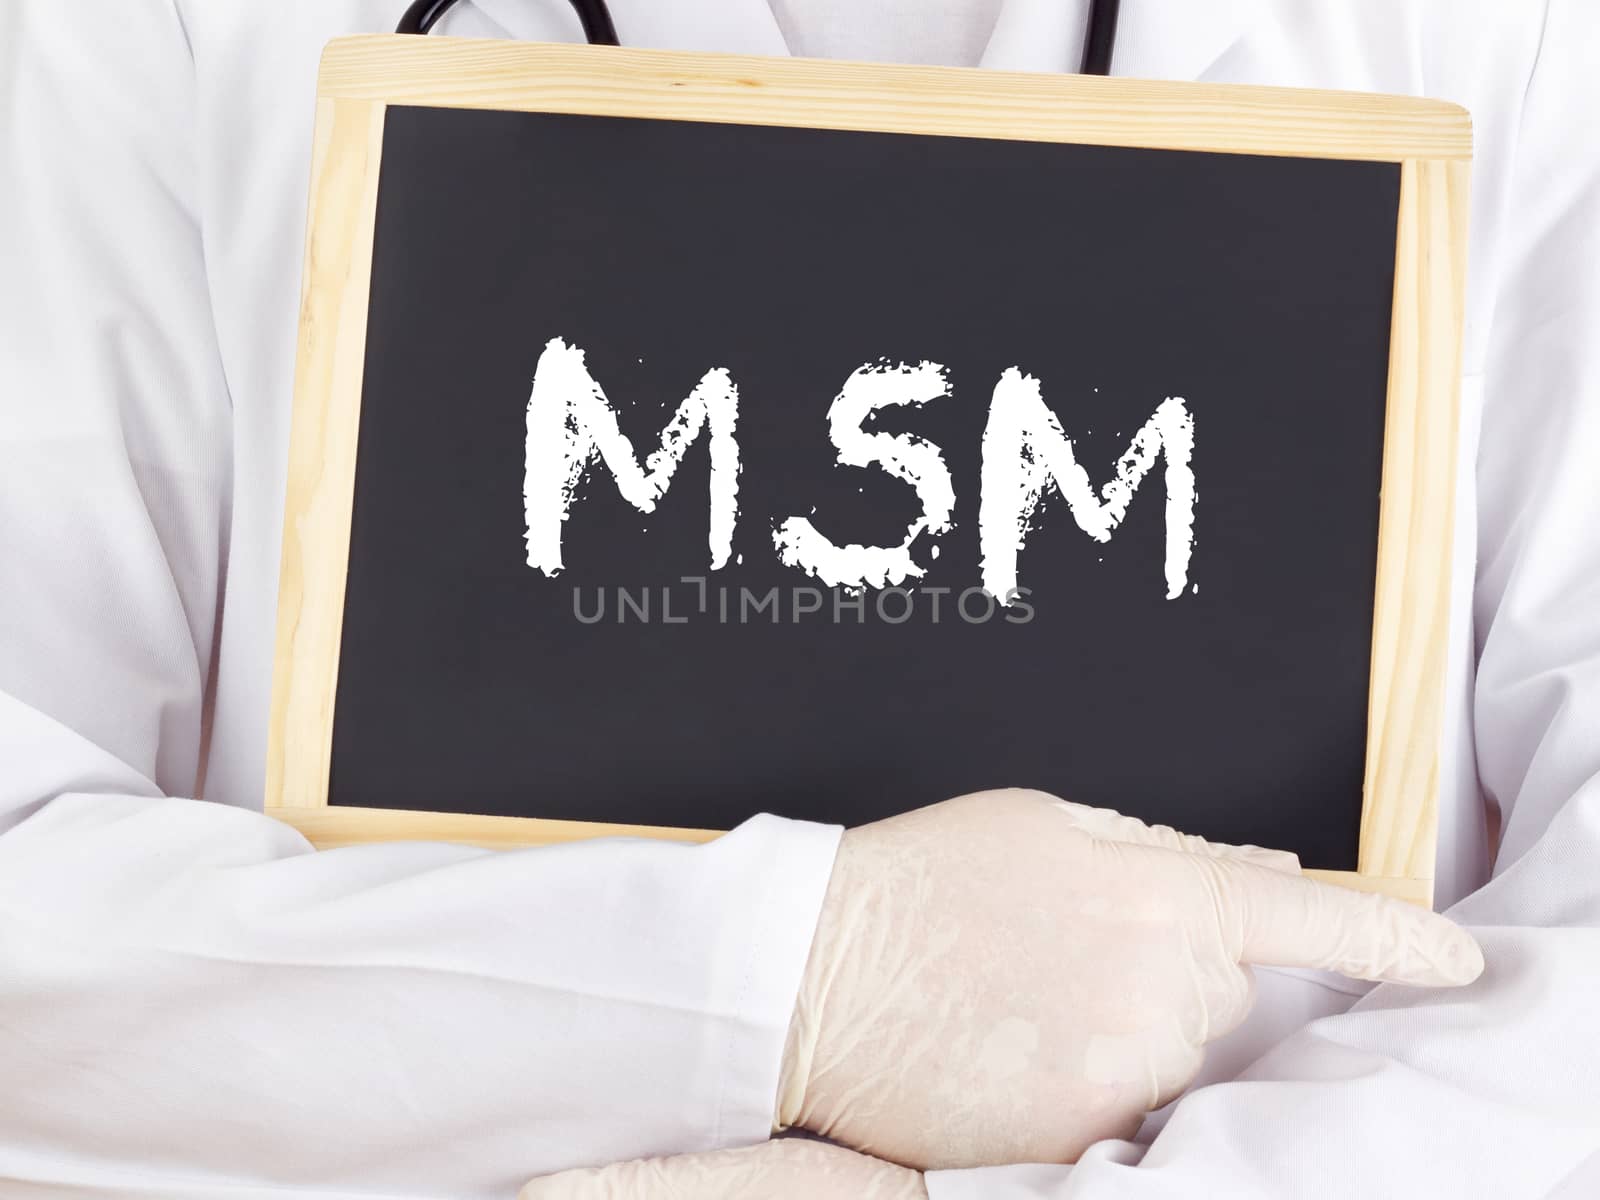 Doctor shows information on blackboard: MSM by gwolters